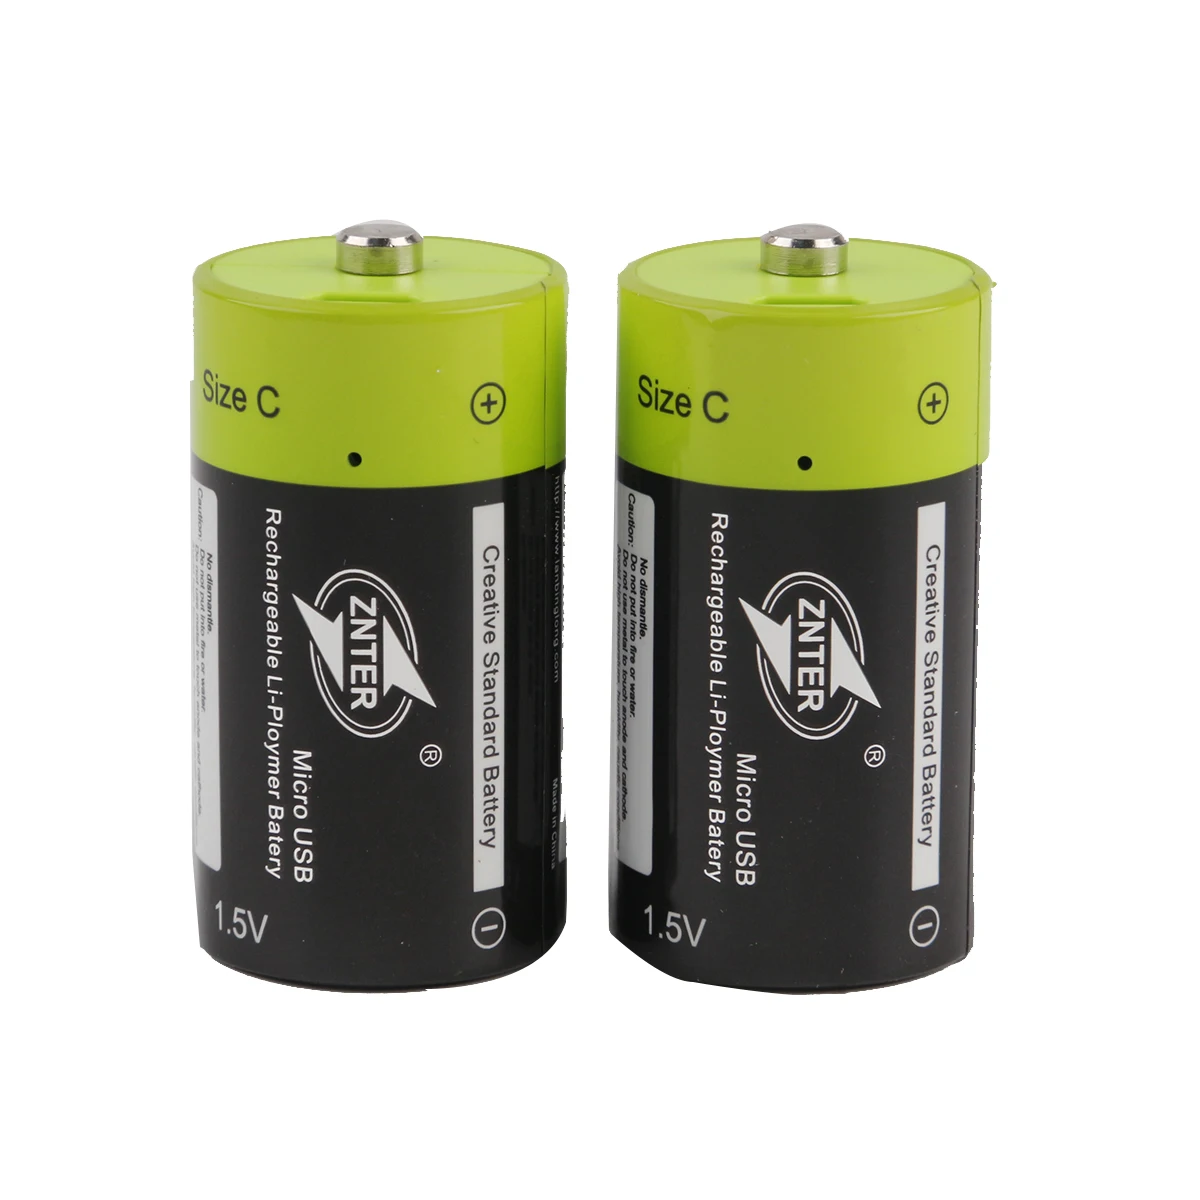 

2PCS 1.5V 3000mAh Universal Micro USB Charging Batteries Rechargeable Battery Size C Charged Lipo Lithium Polymer Batteria 5V 2A